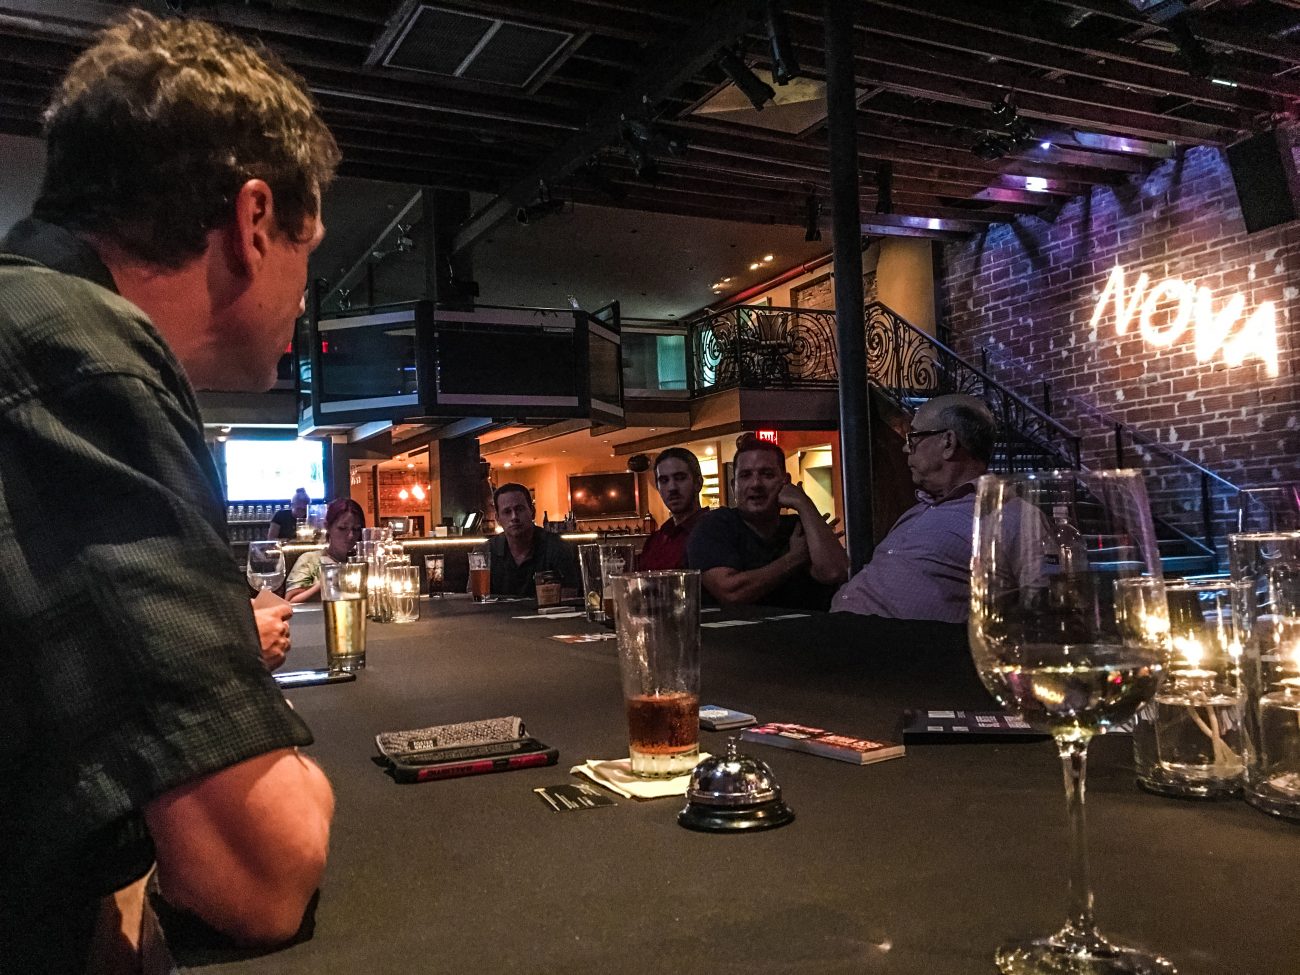 2016 07-21 Entrepreneur Social Club at DTSP venue NOVA 535 nick | When the Cat was away the mice did play 